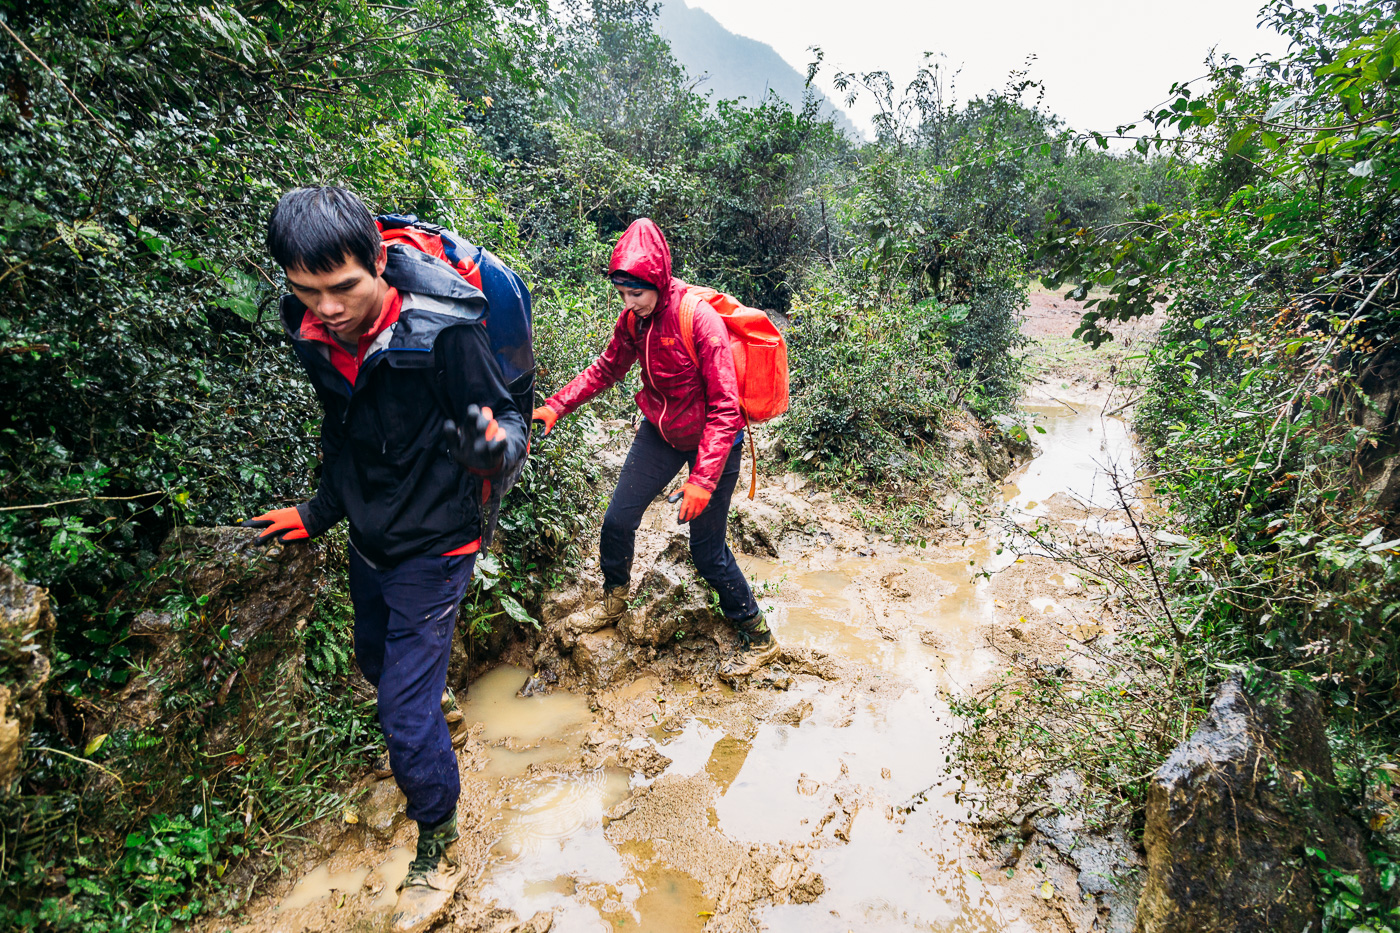 Dodging the mud on our Tu Lan Jungle Challenge tour with Oxalis in Phong Nha Vietnam